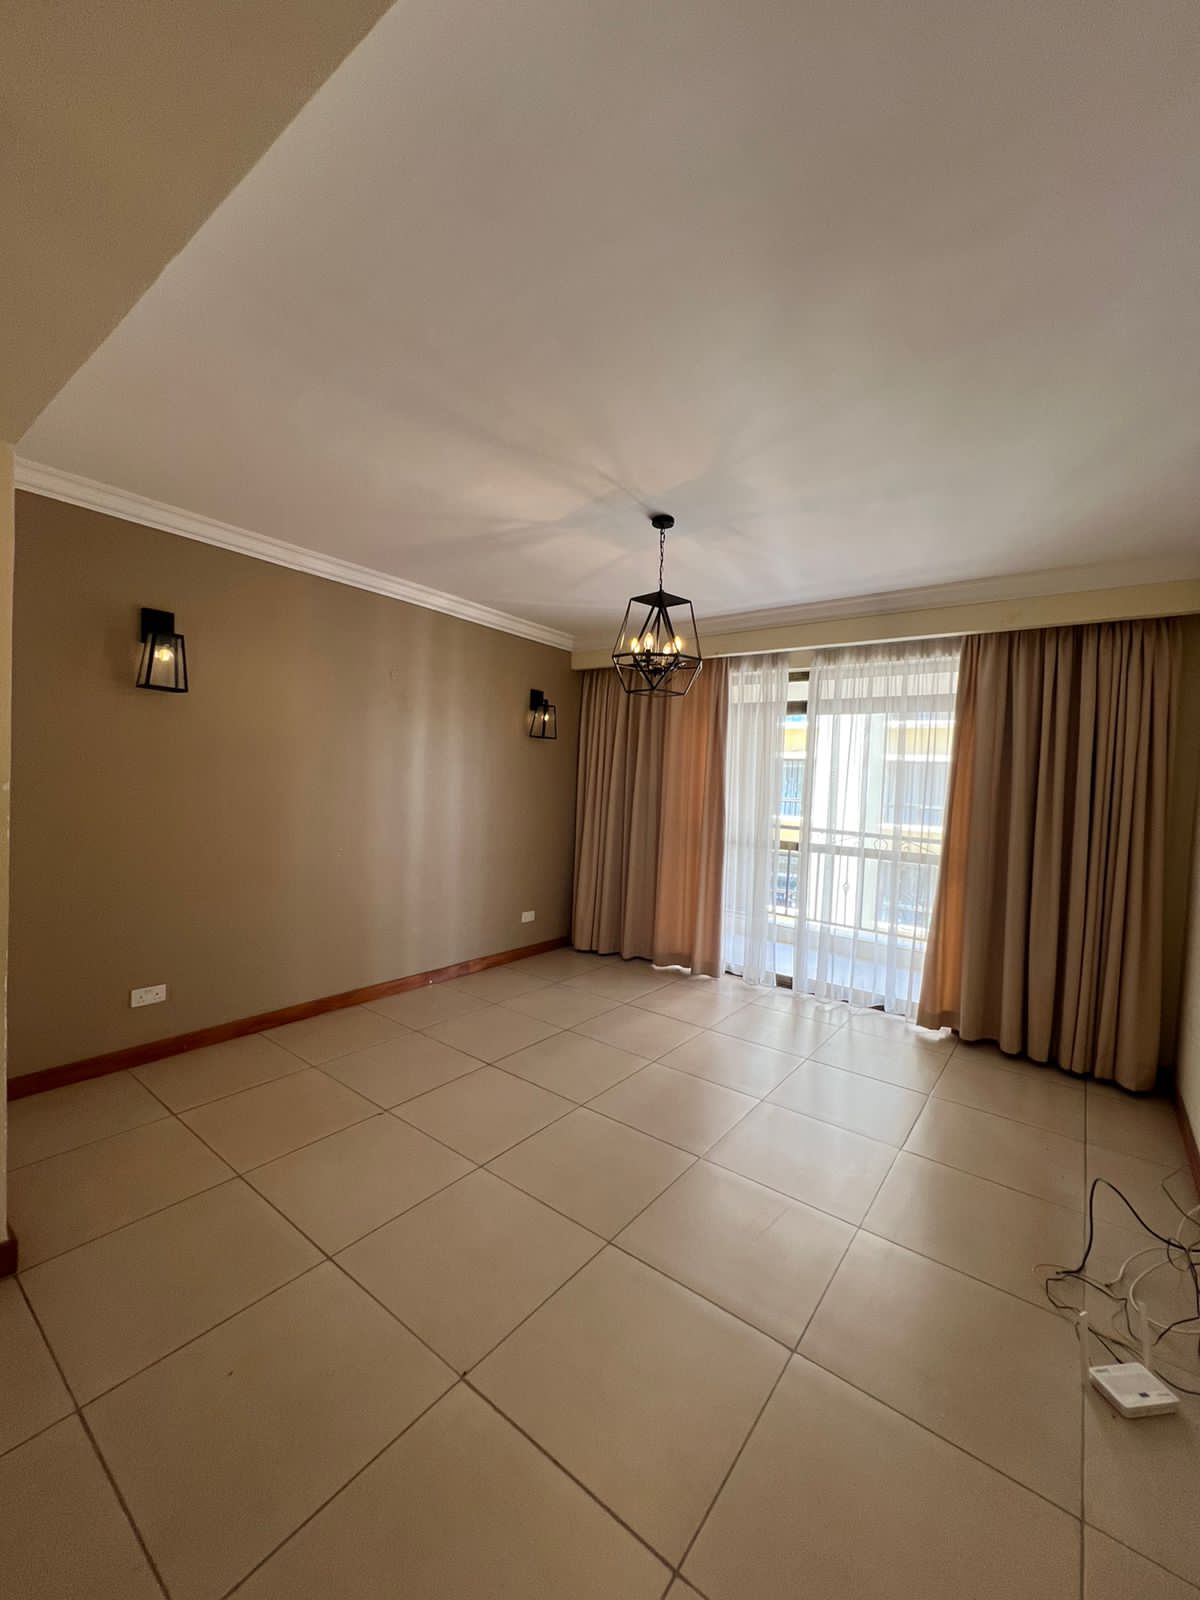 2 Bedroom Apartment with Master bedroom en suite with open fitted kitchen and ample parking. Rent Per month: 75,000